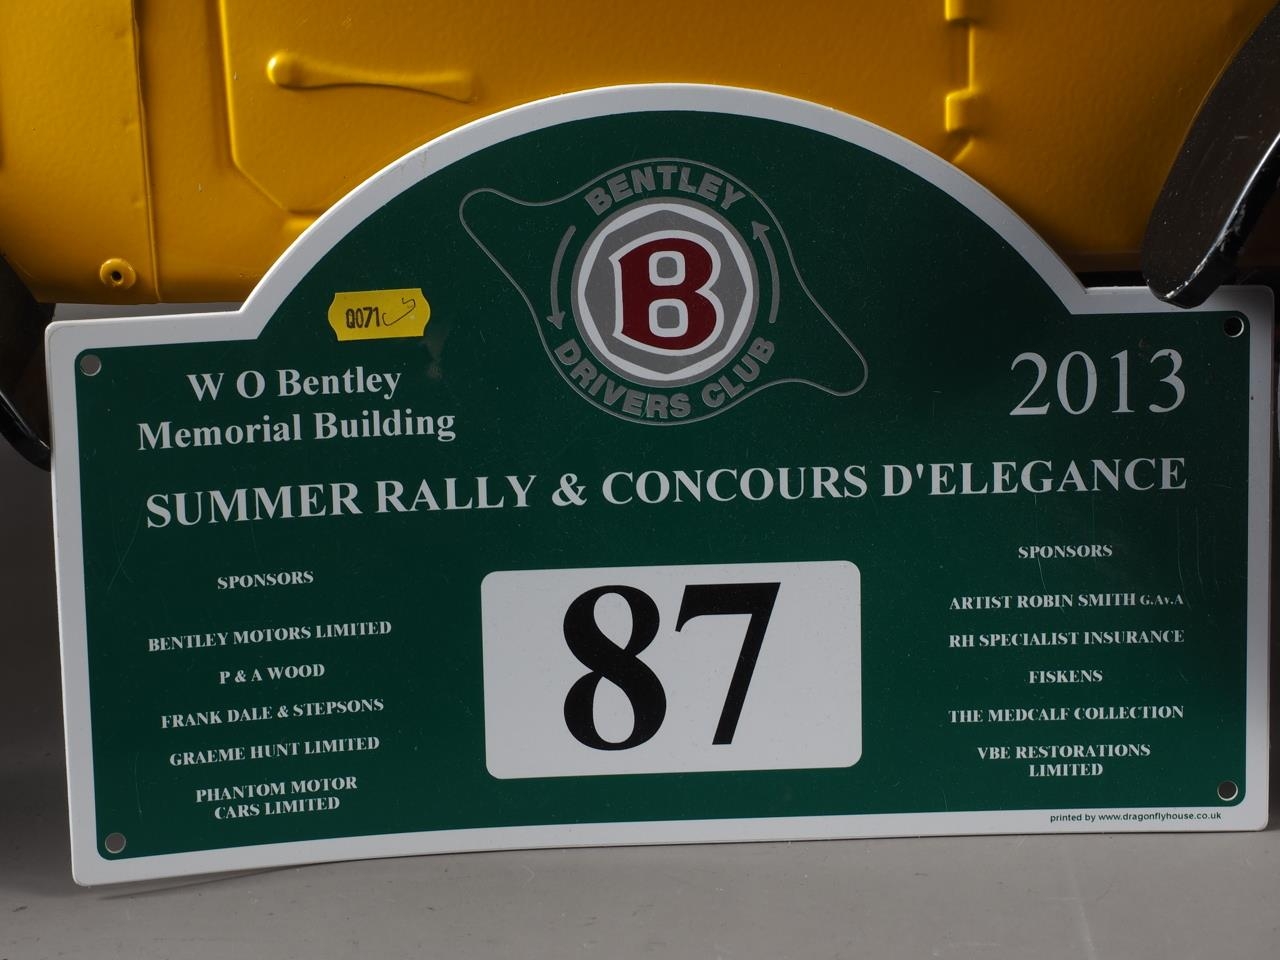 A Great Gizmos painted metal pedal car, in the vintage style, and a Bentley Drivers Club Rally sign - Image 2 of 2